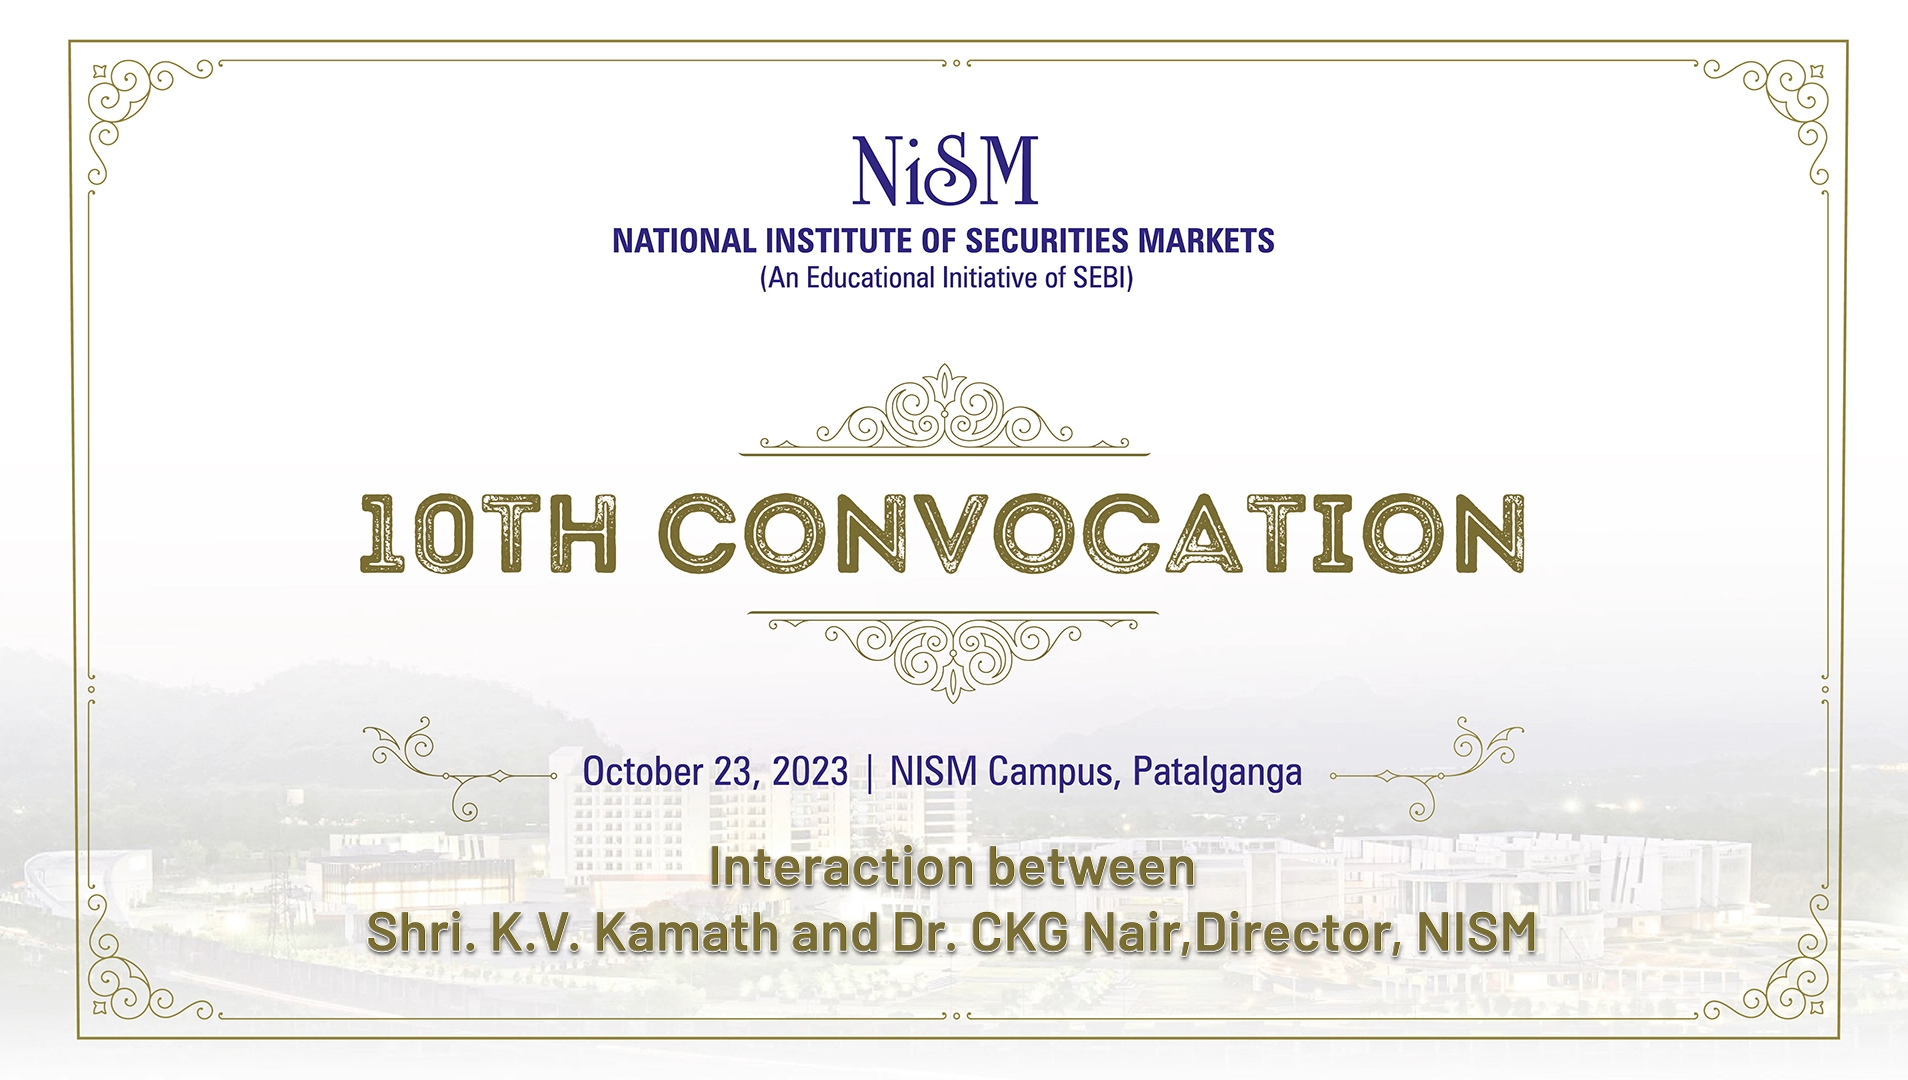 Interaction between Shri. K.V. Kamath and Dr CKG Nair, Director, NISM during the 10th Convocation